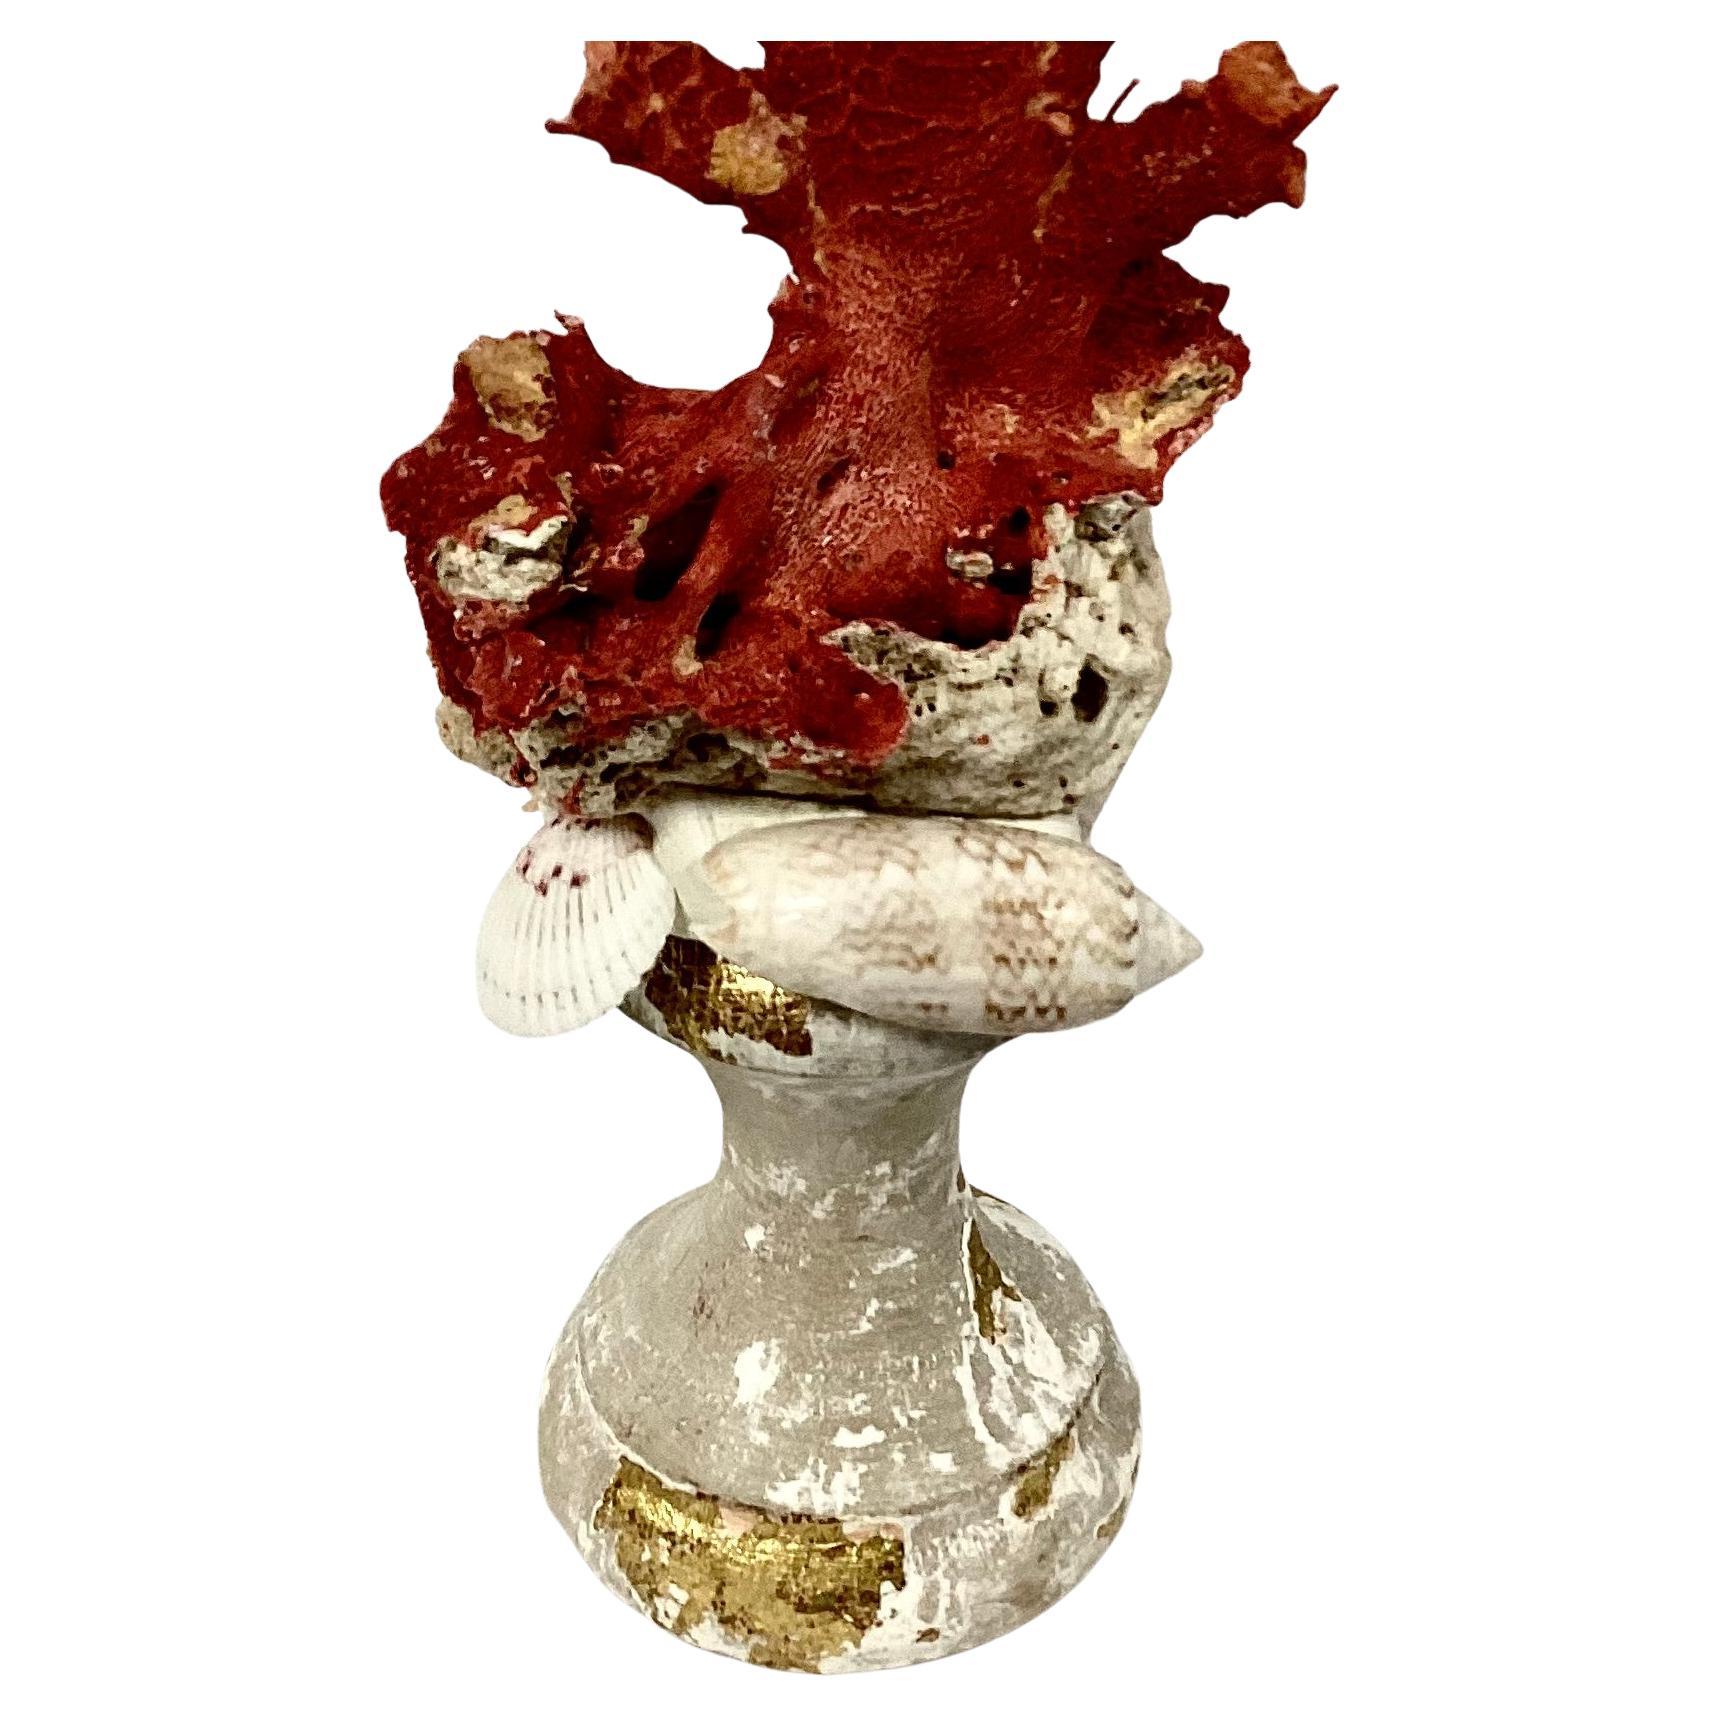 A hand-crafted sculpture specimen of natural red coral branches mounted on a 18th century giltwood urn fragment base with sea shell trim.